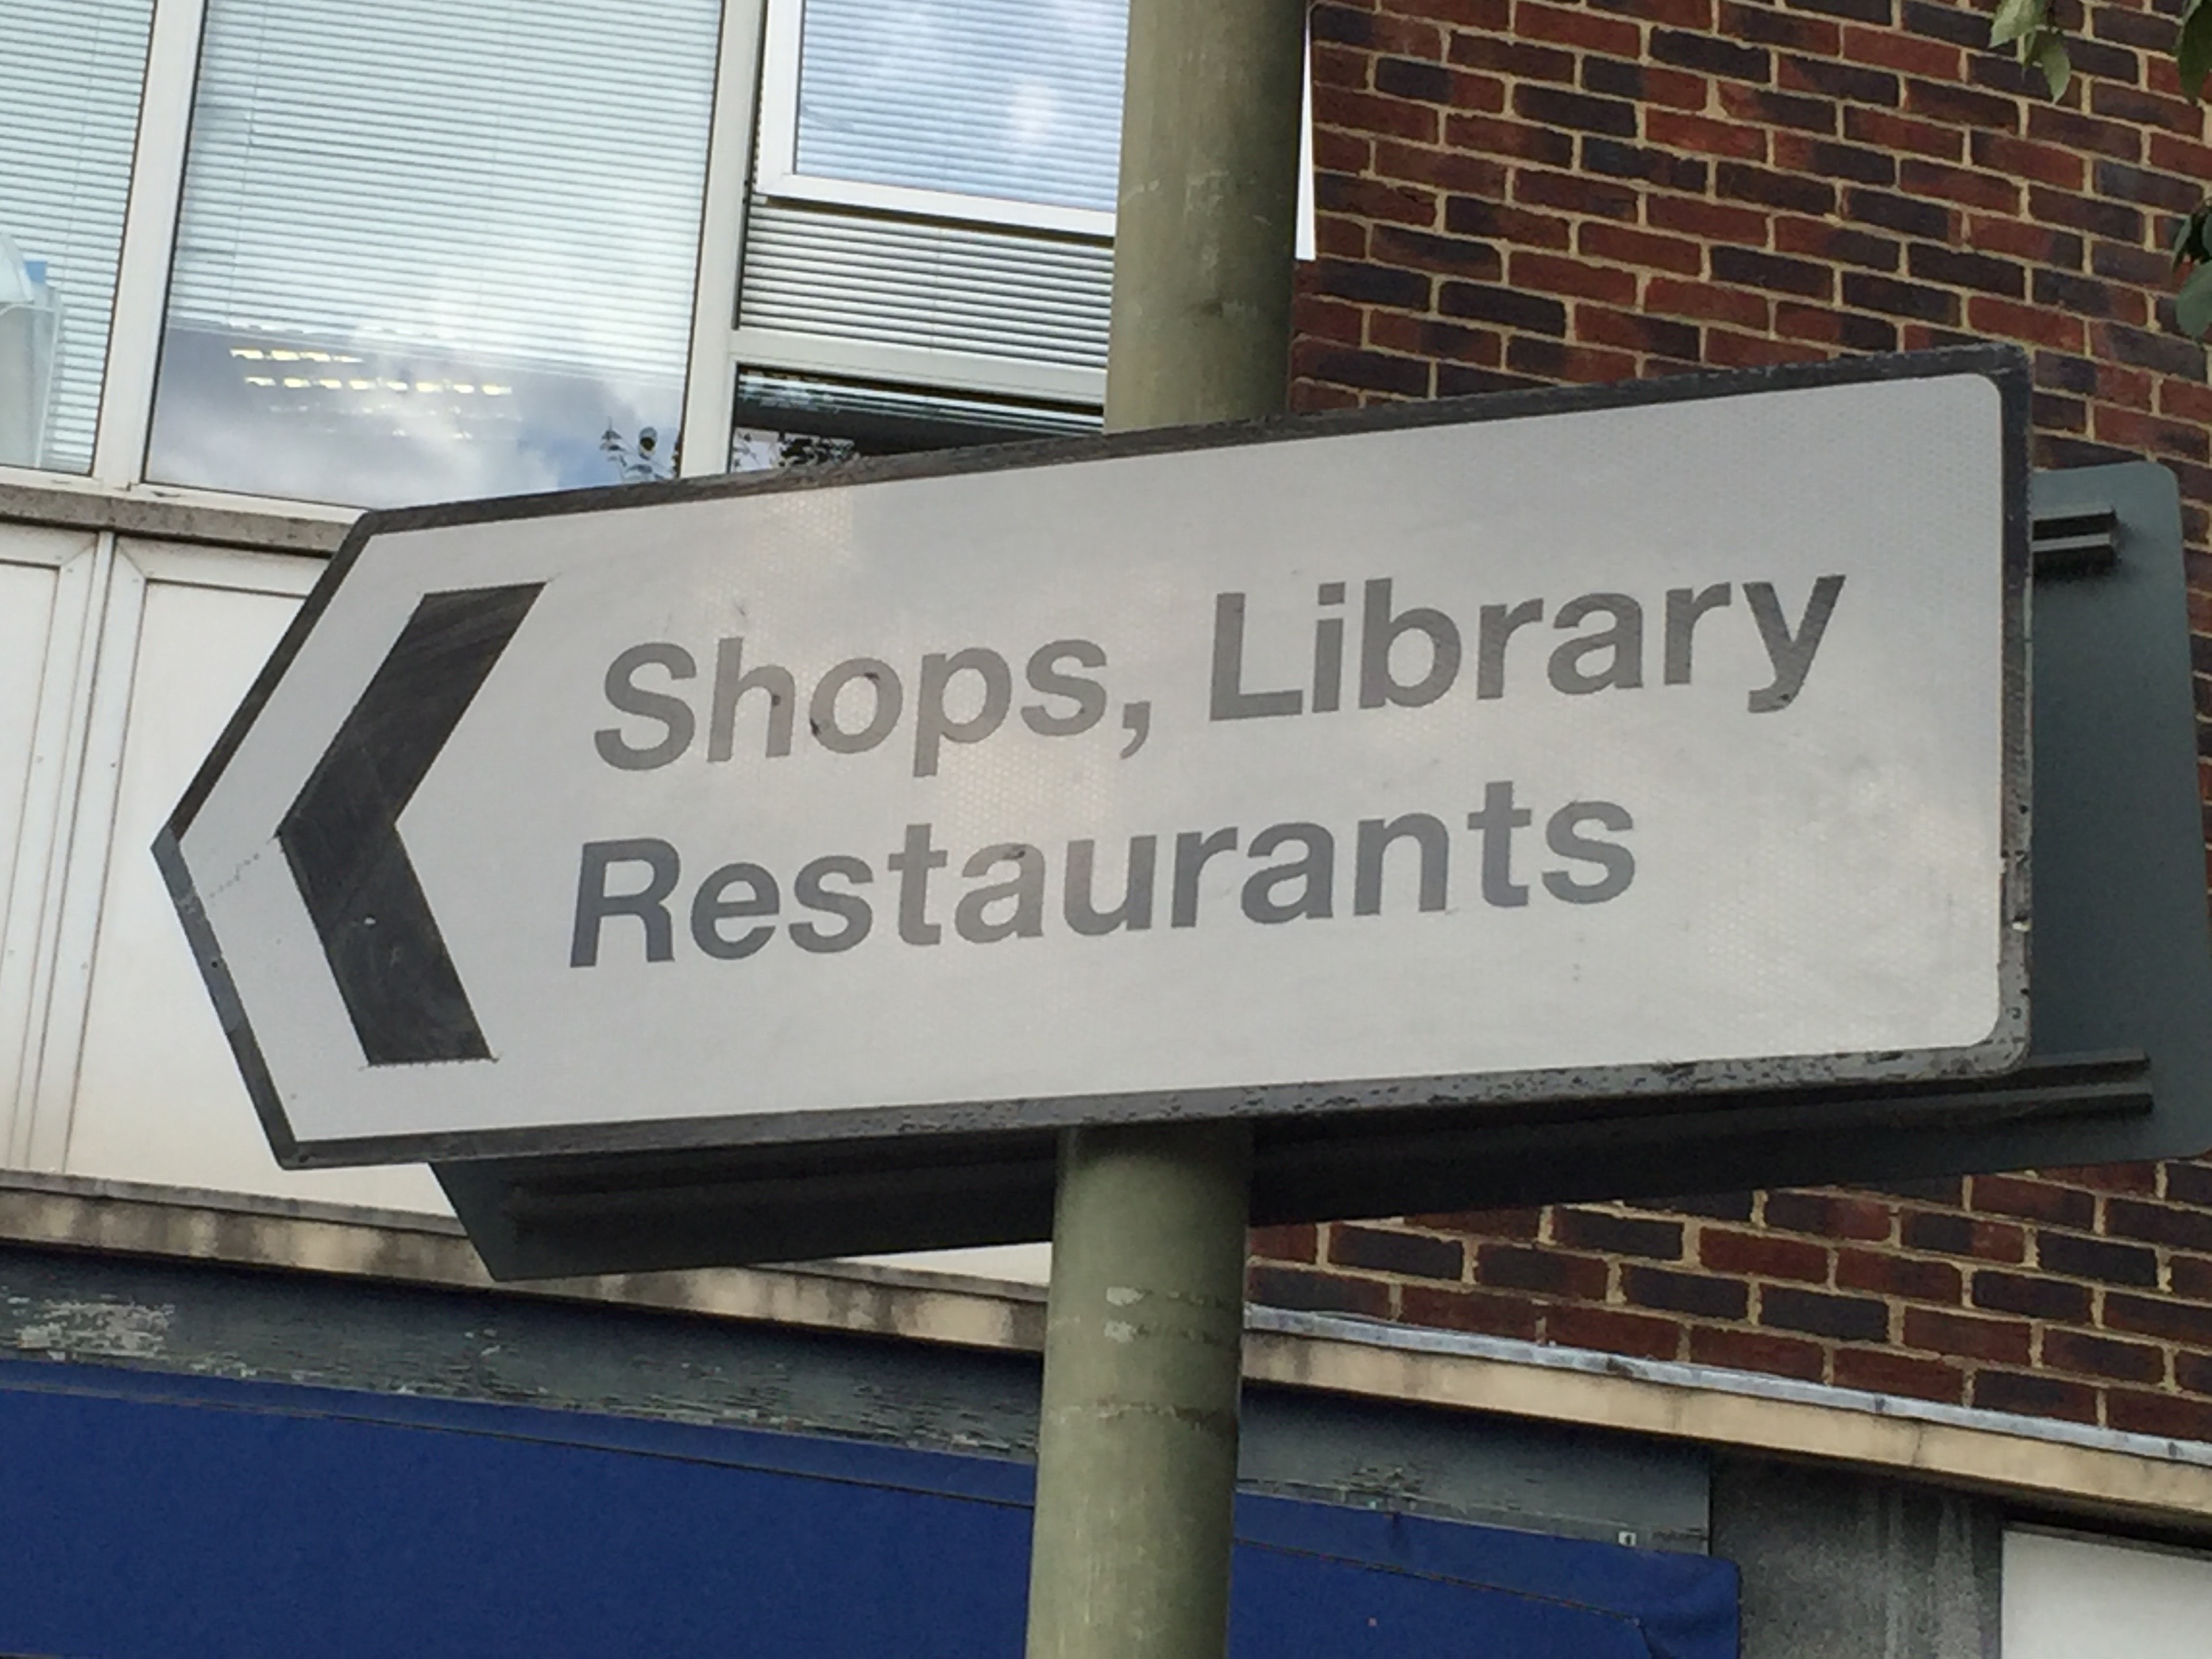 Sign in Summertown, Oxford